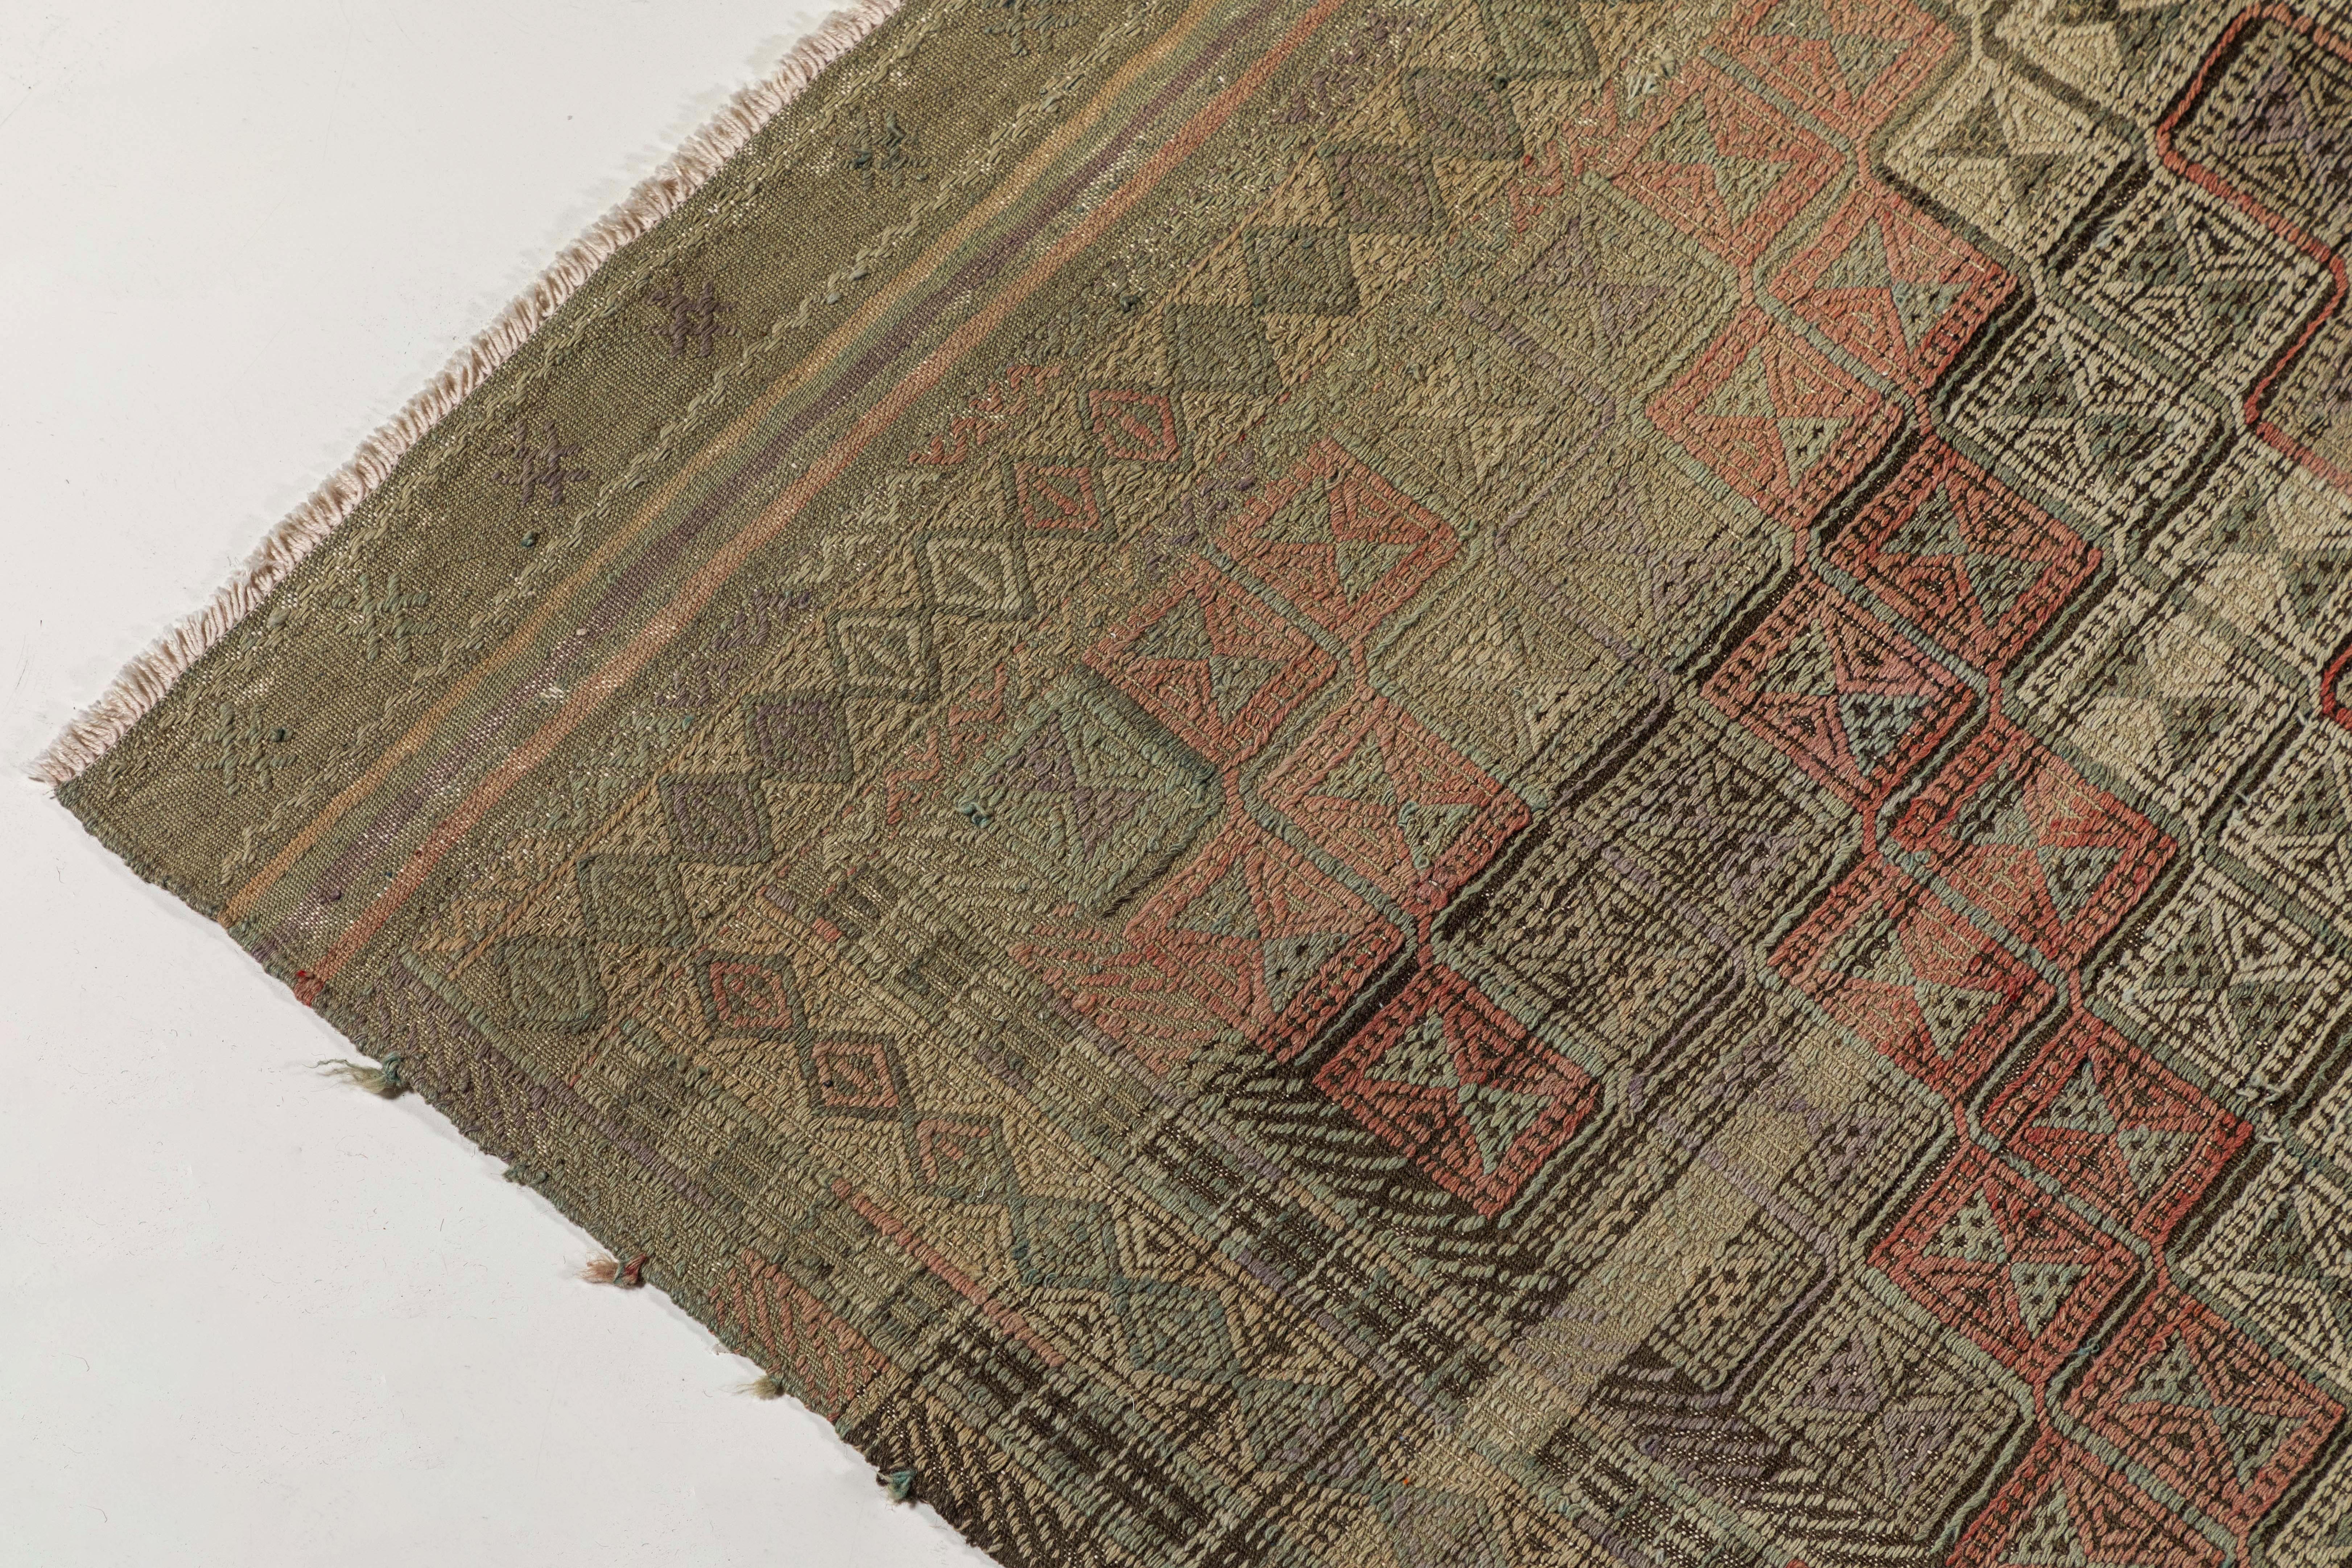 Vintage Turkish Ozdemir flat-weave rug with grey and mauve accents.